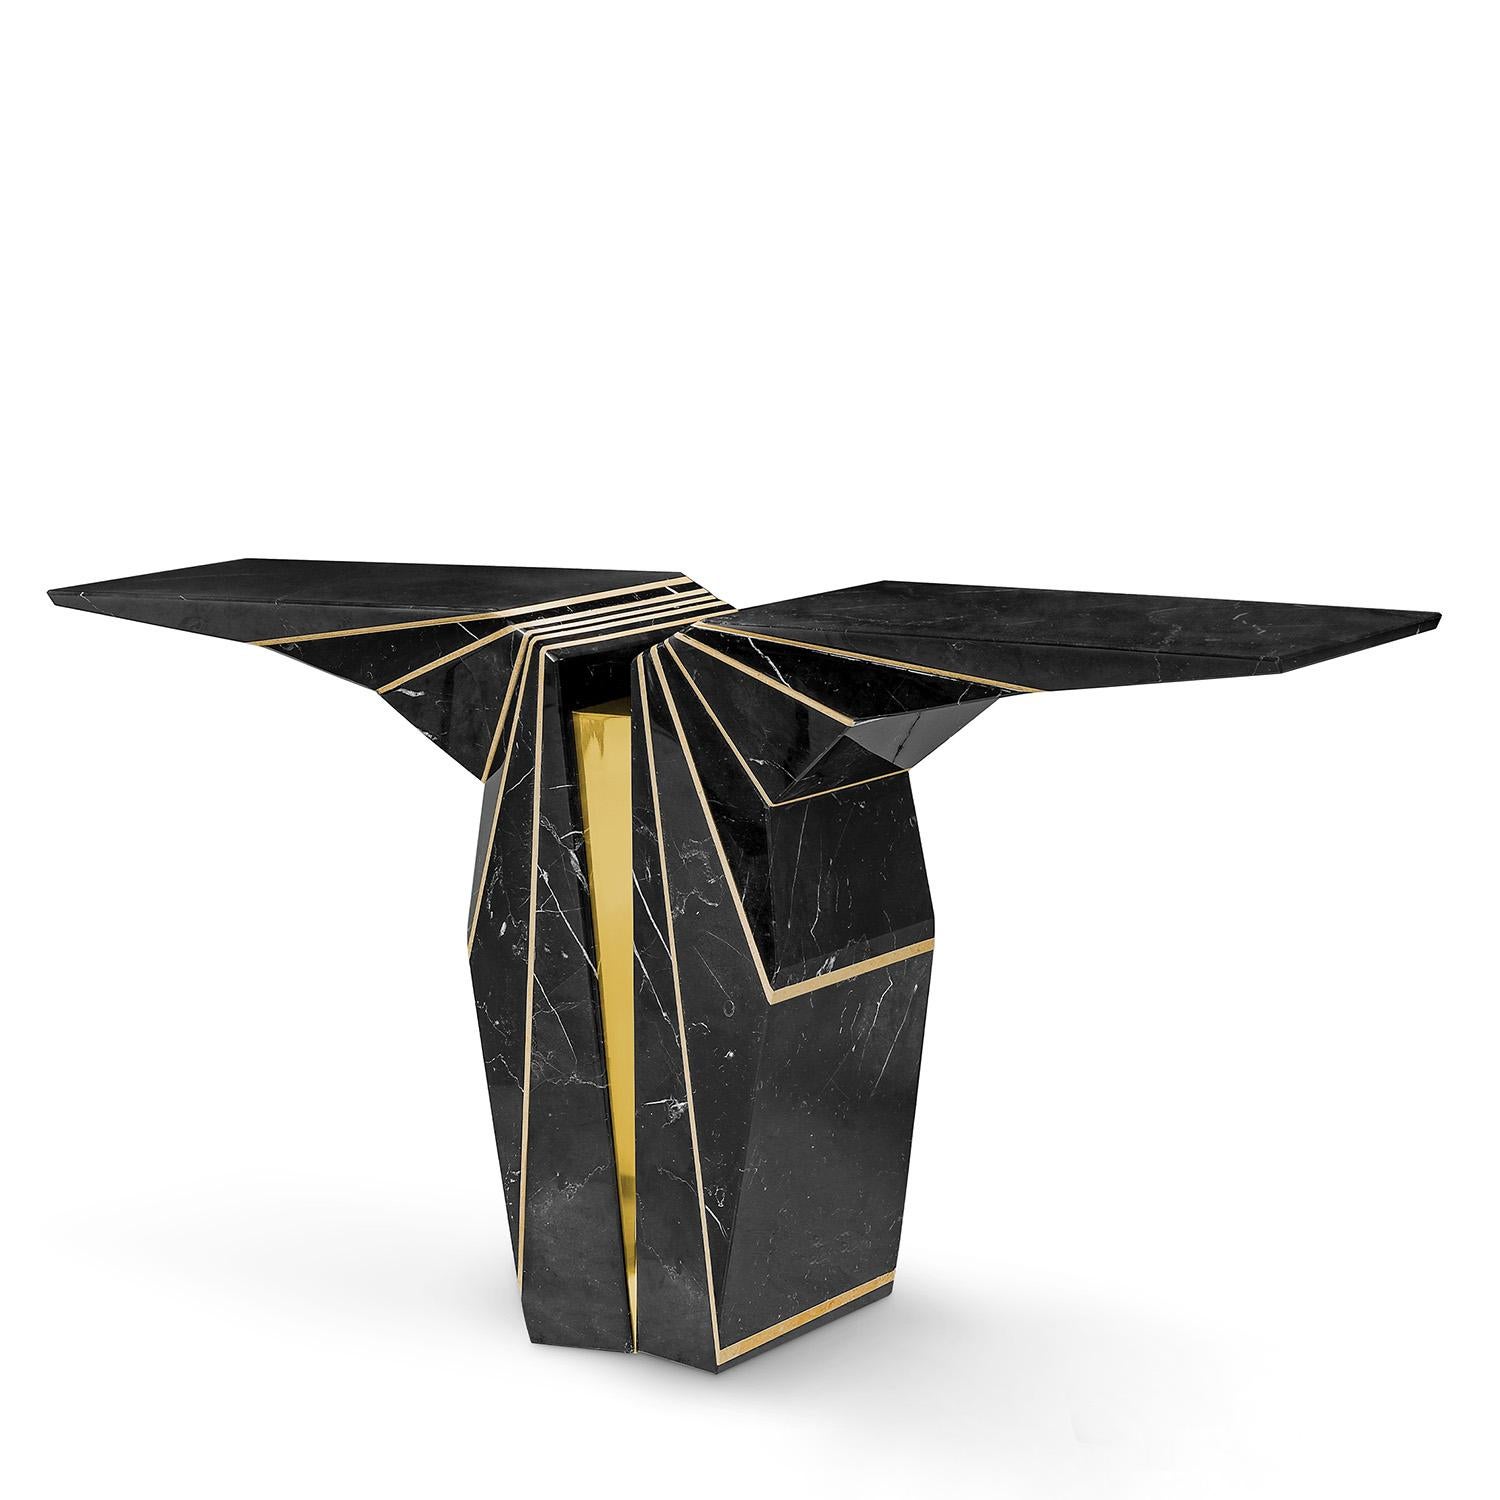 Console Table Wings Marble with black marble structure,
engraved with yellow marble trims and with central part in 
solid brass in polished finish. Exceptional piece.